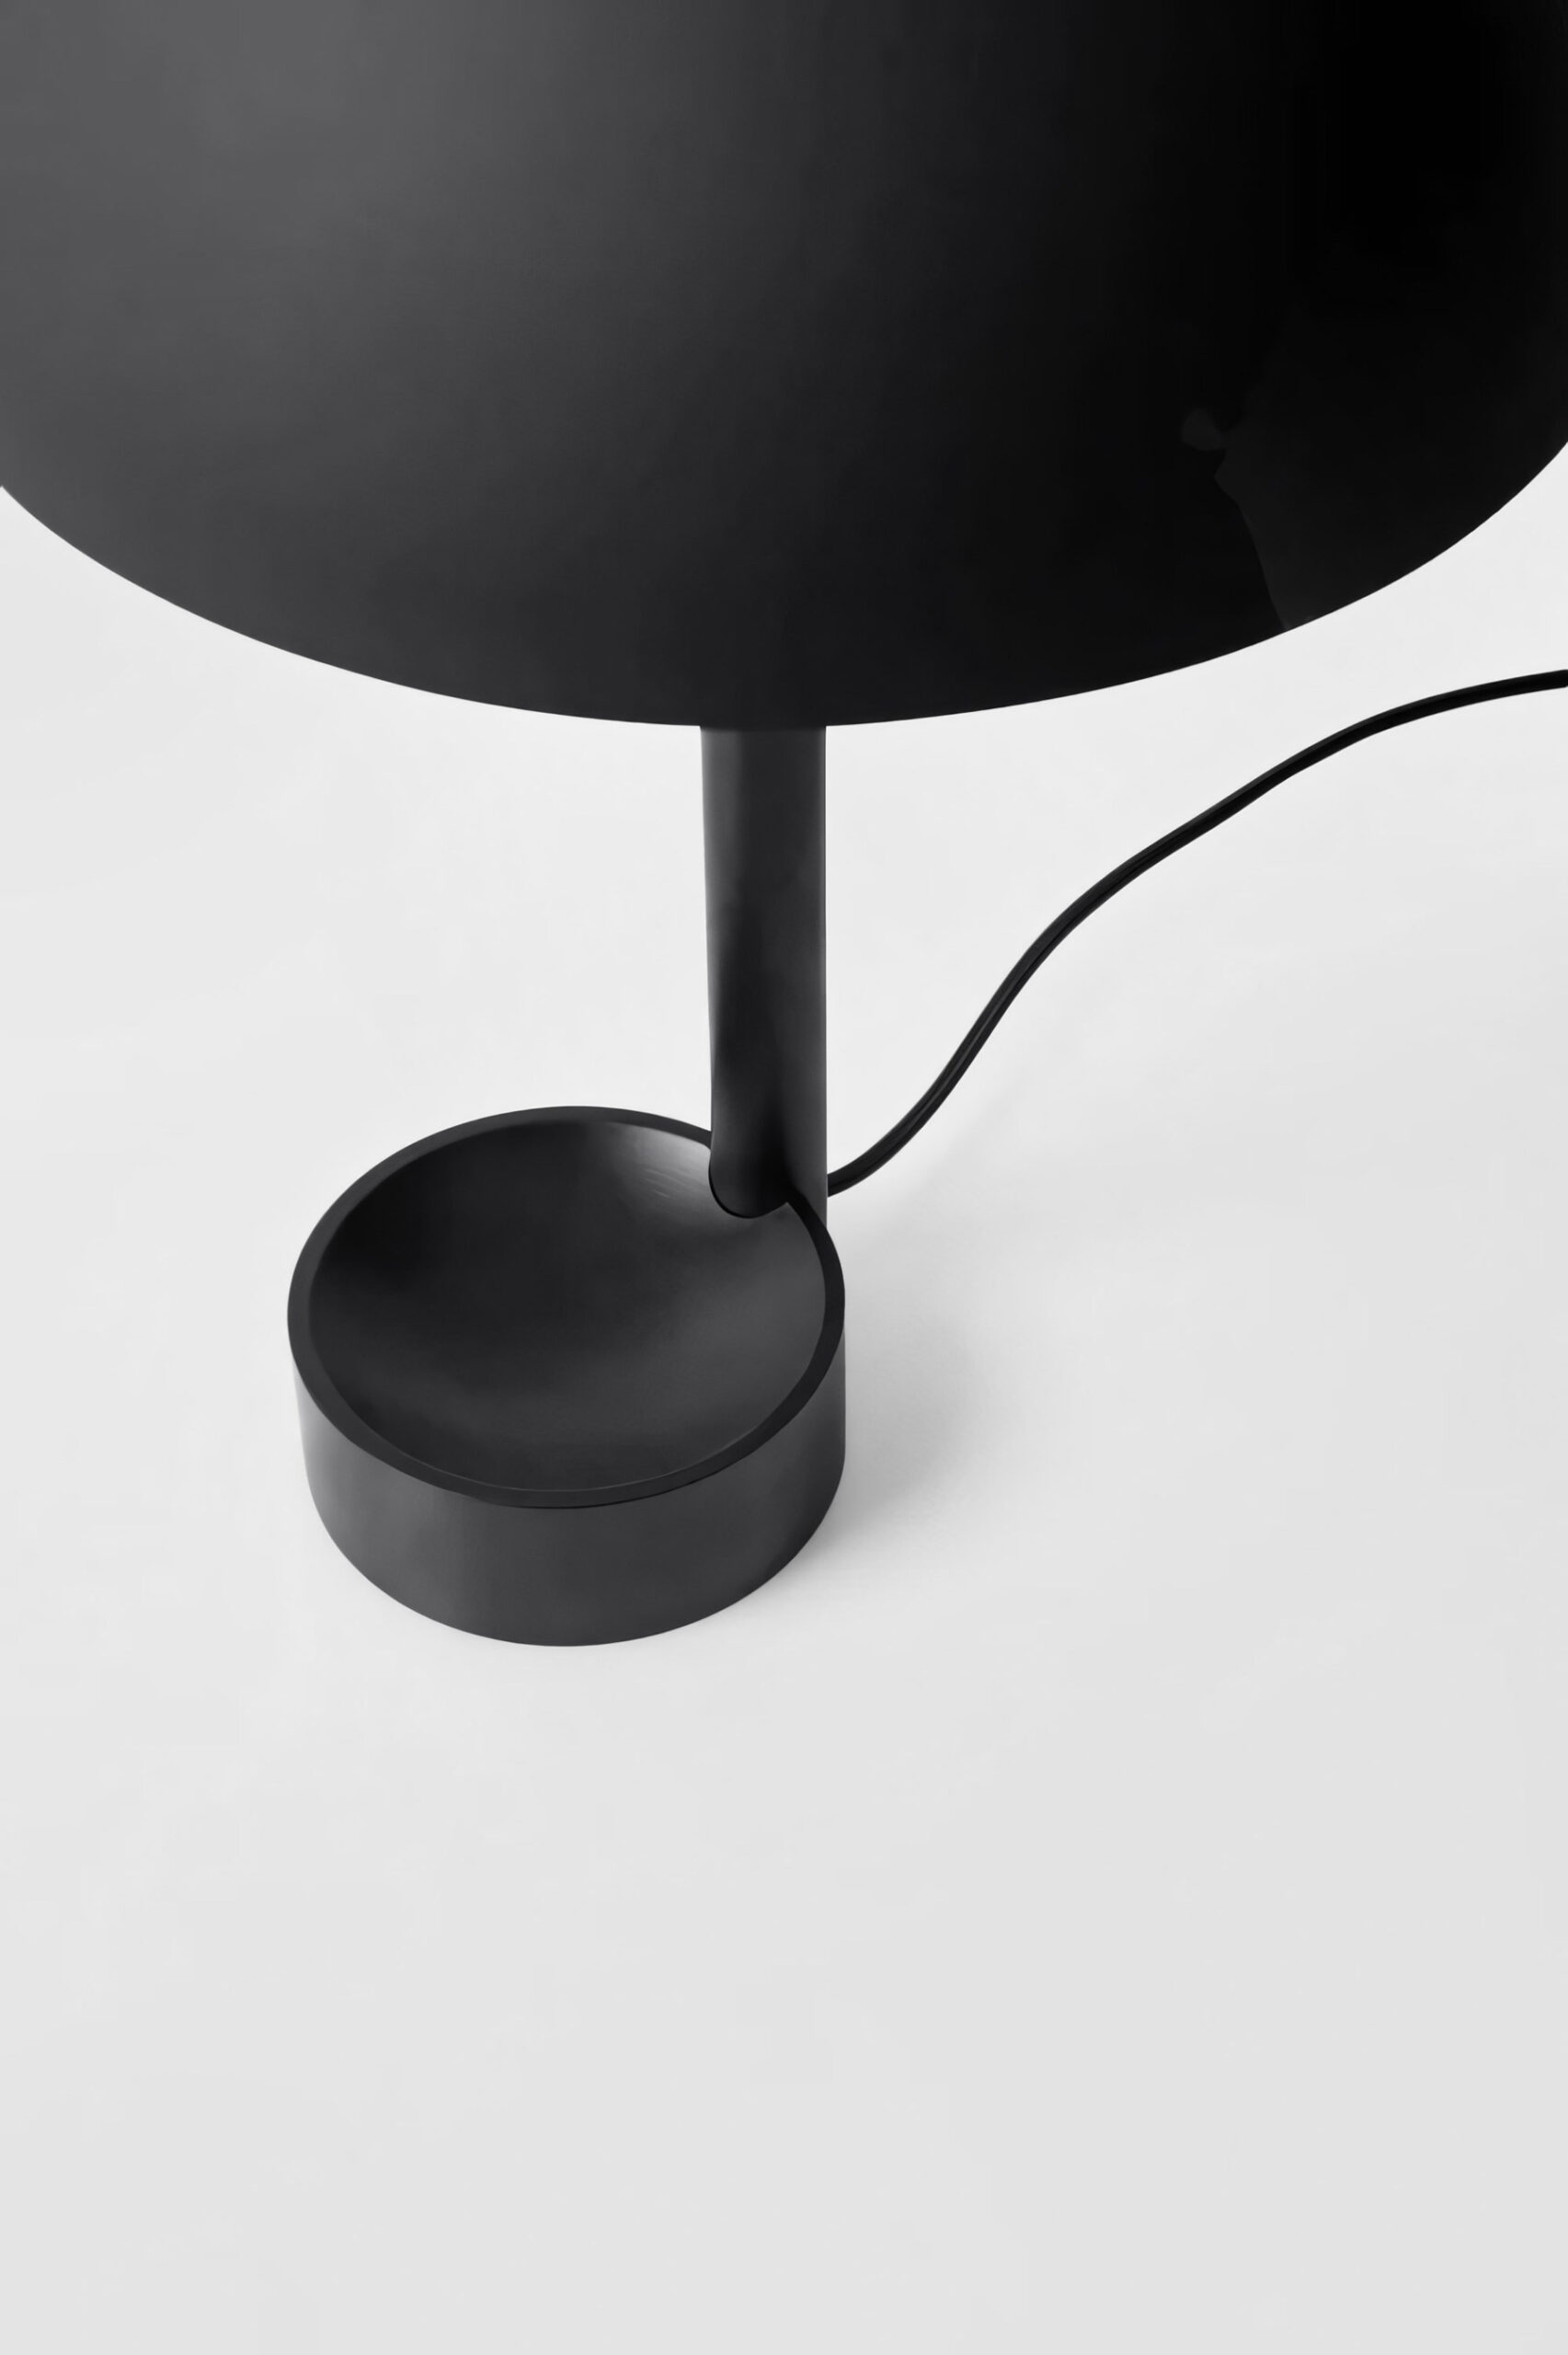 Copa Table Lamp by Guilherme Wentz | Aesence